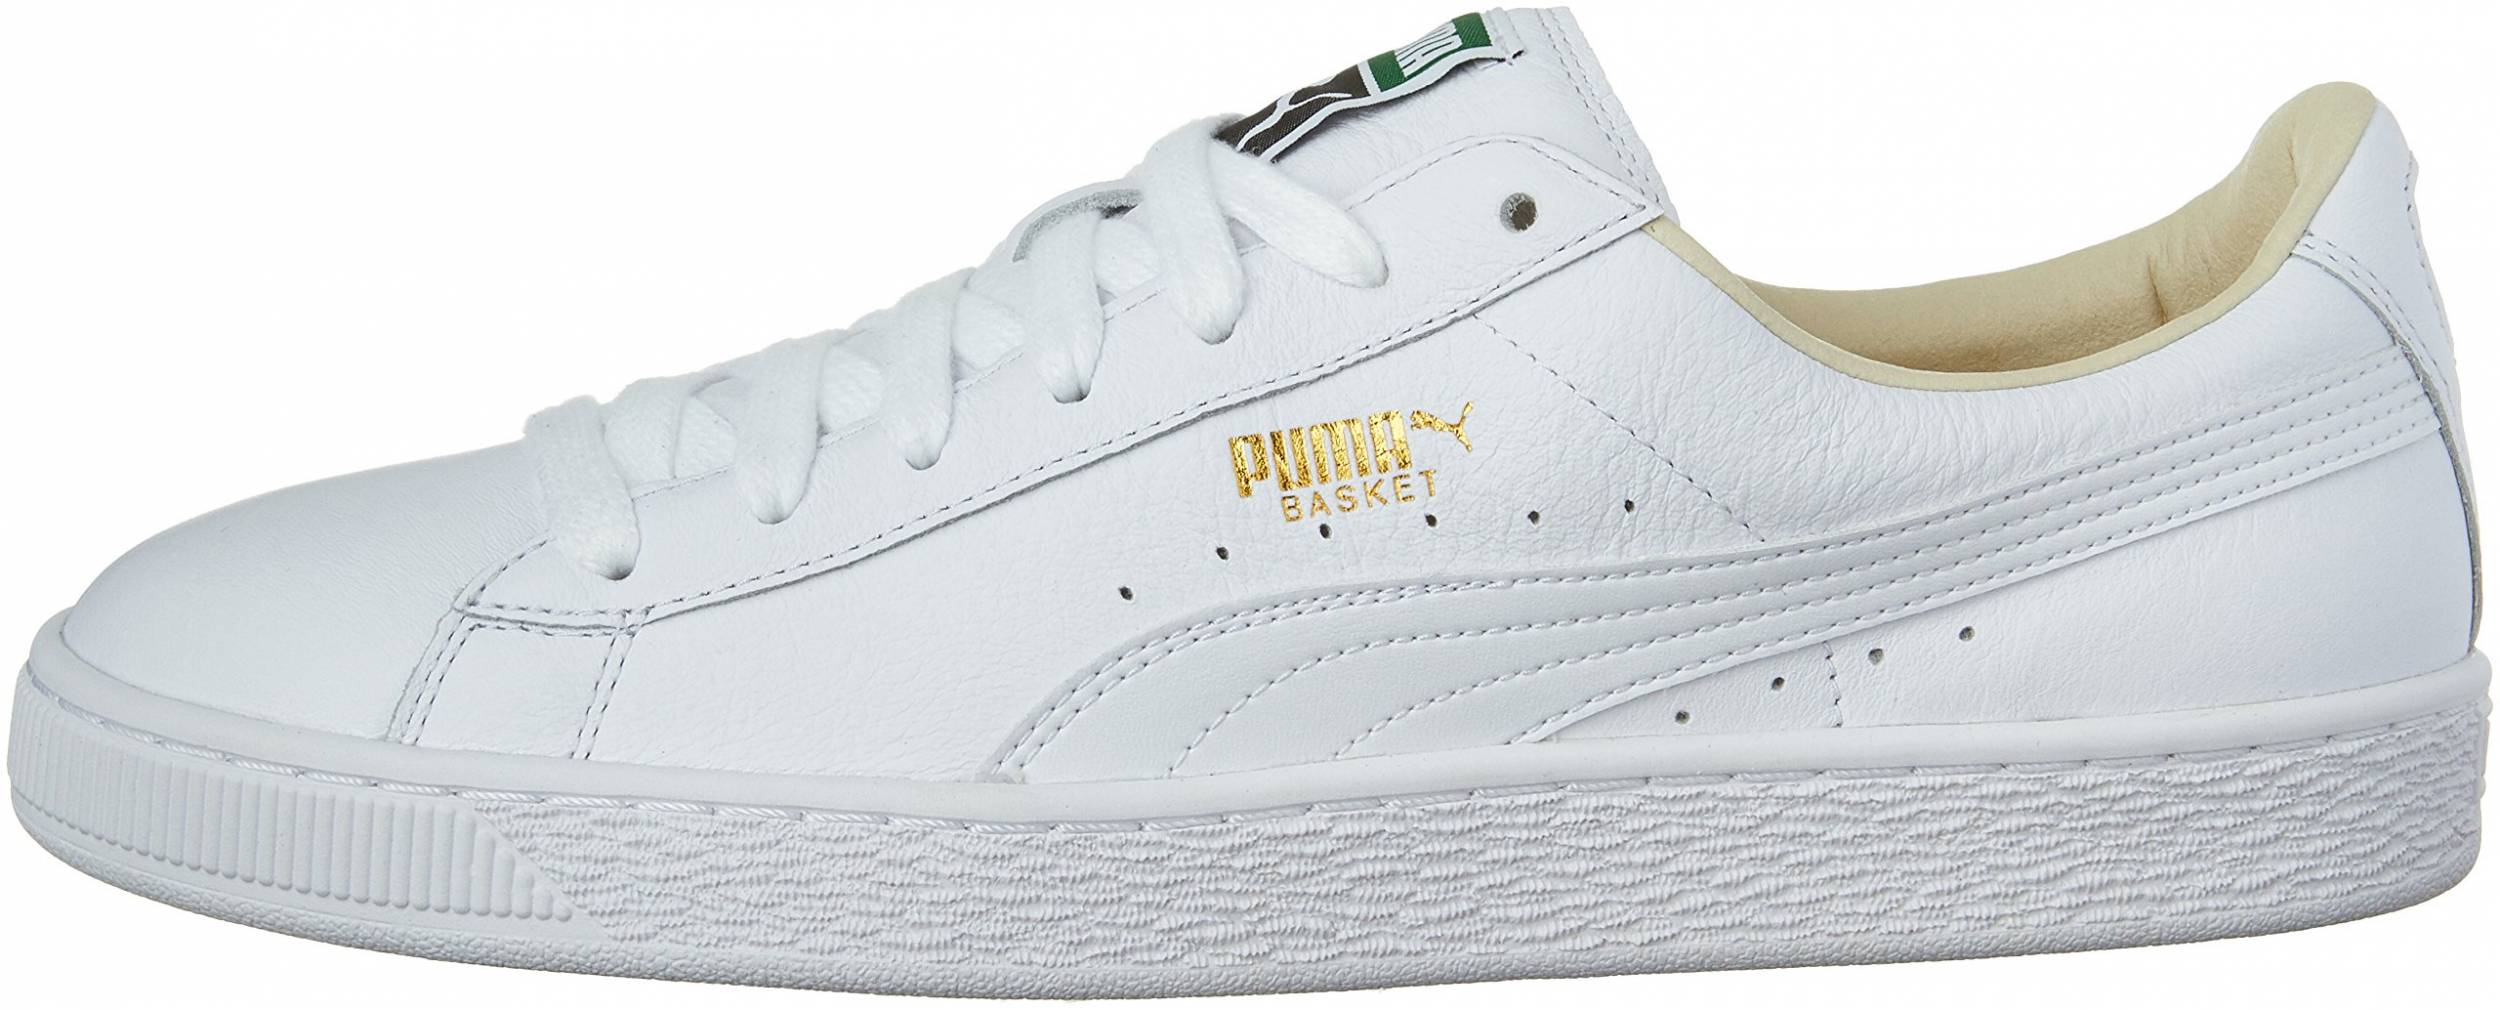 Save 46% on White Puma Sneakers (60 